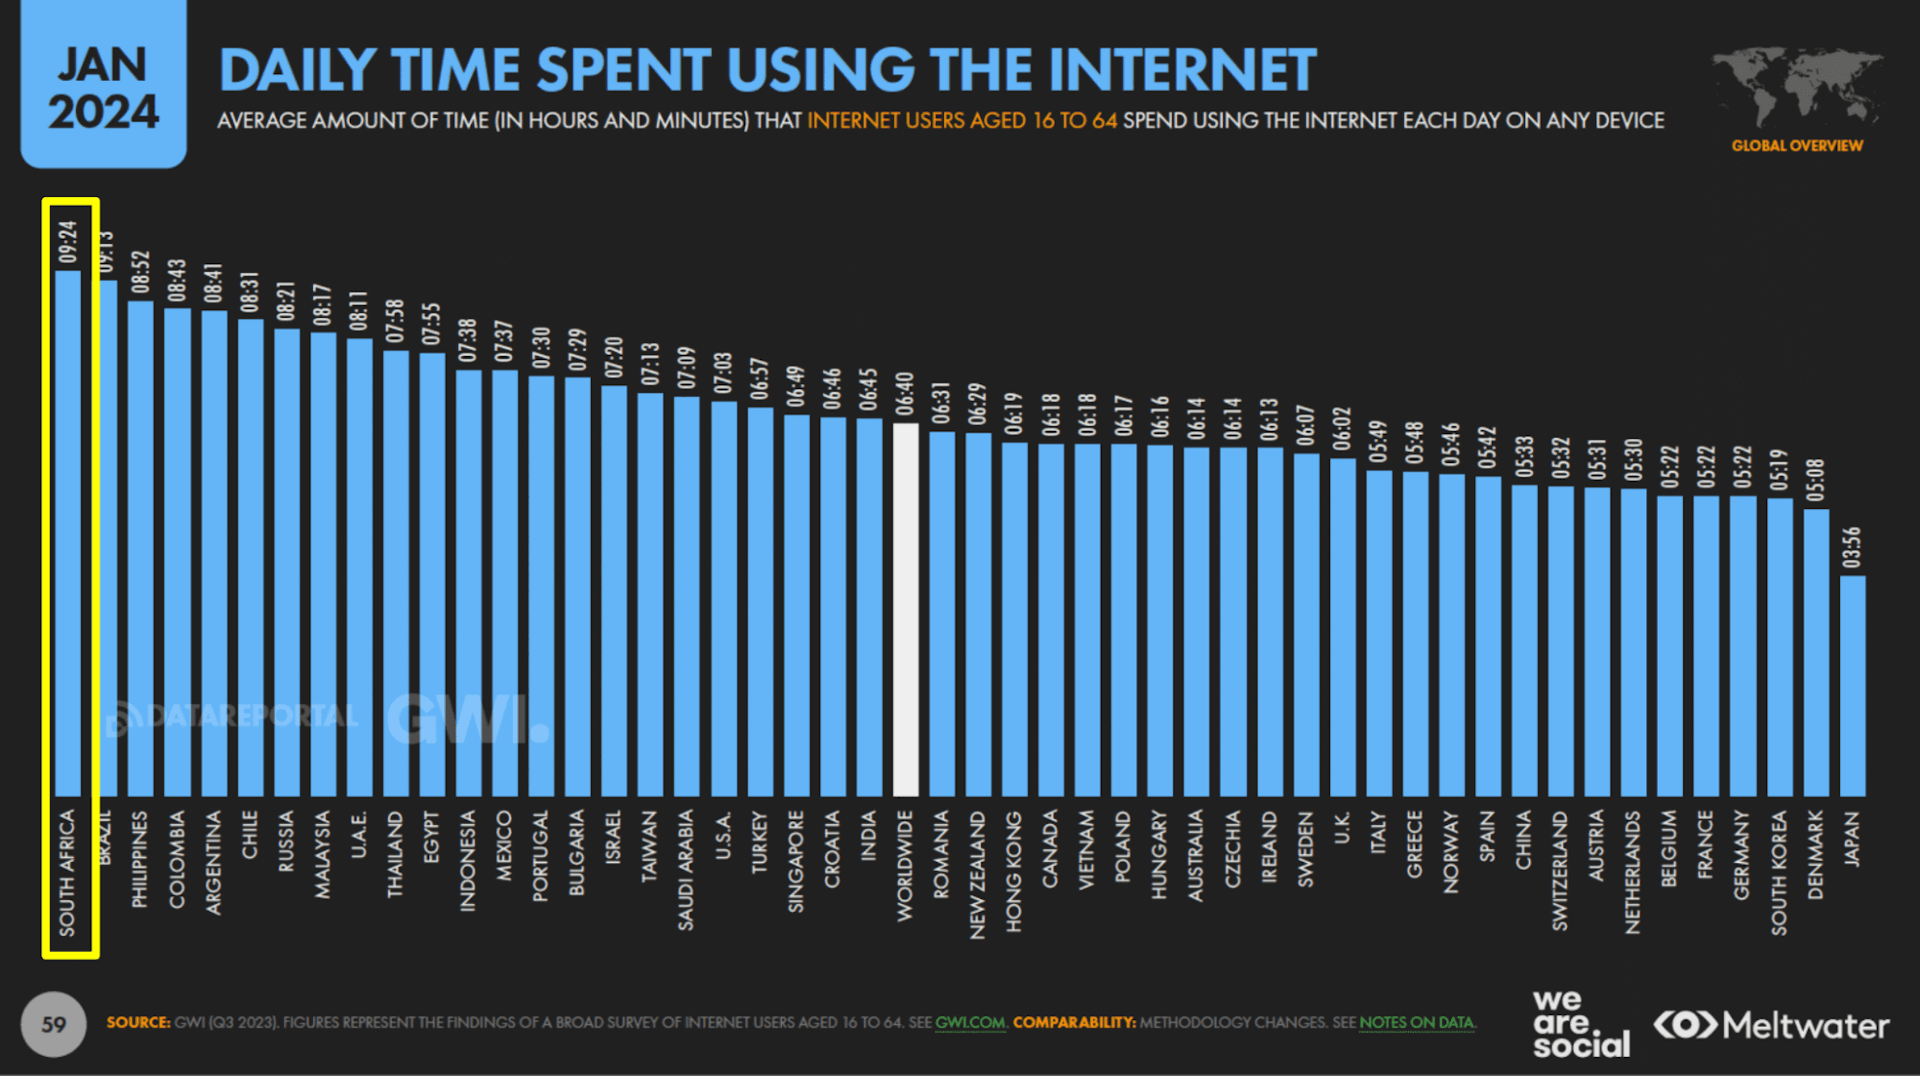 2024 Social Media Statistics South Africa: Daily time spent using the internet